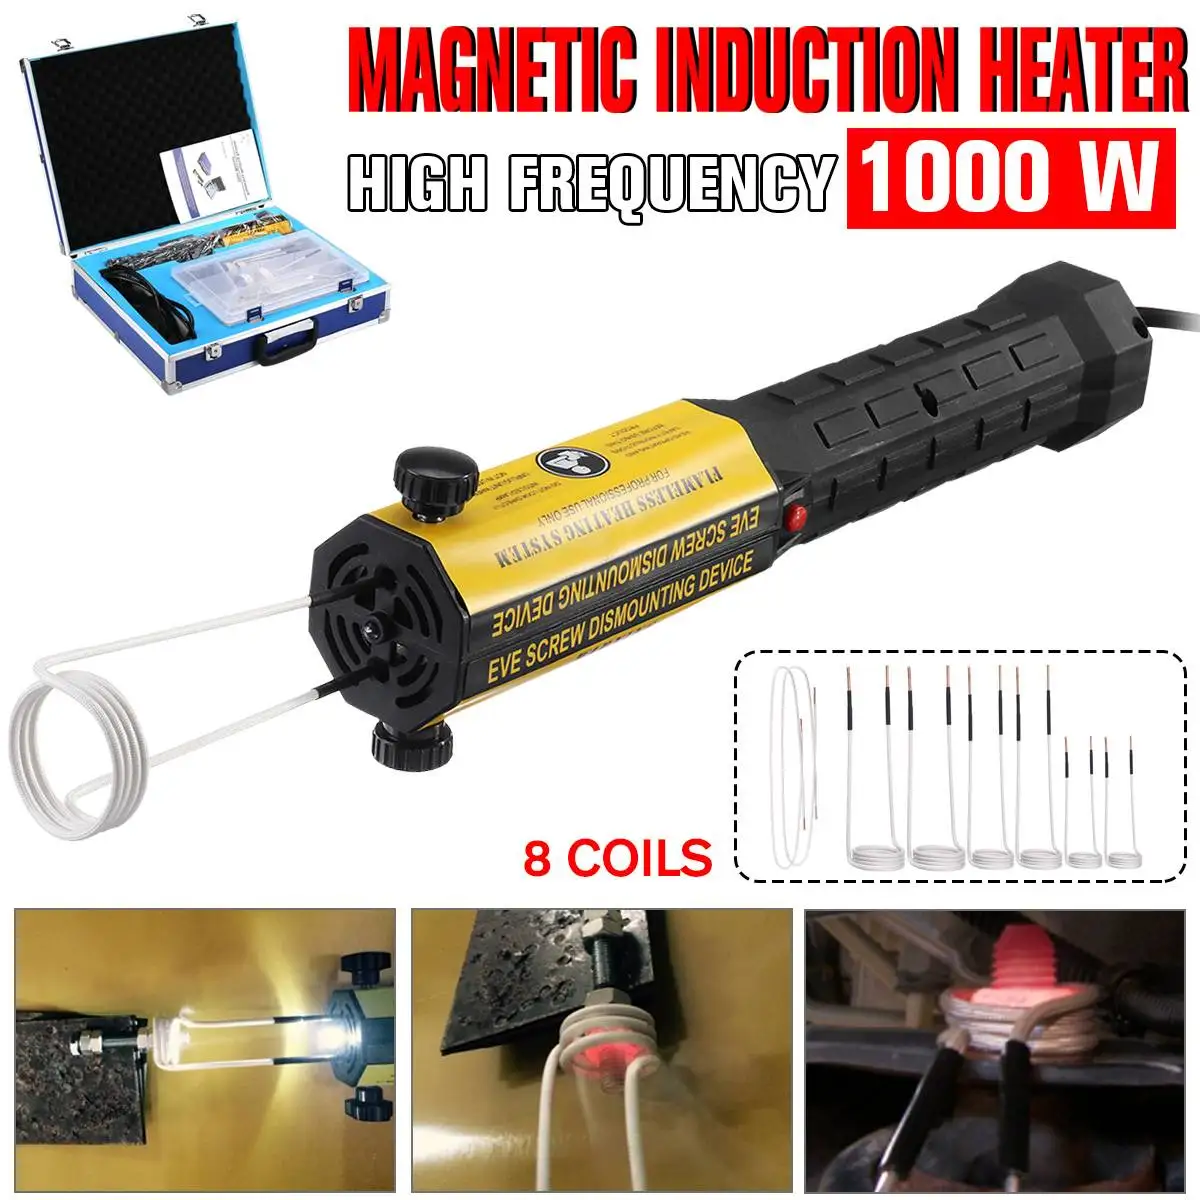 1000W Magnetic Induction Heater Tool Kit Automotive Flameless Heat Removing Rust